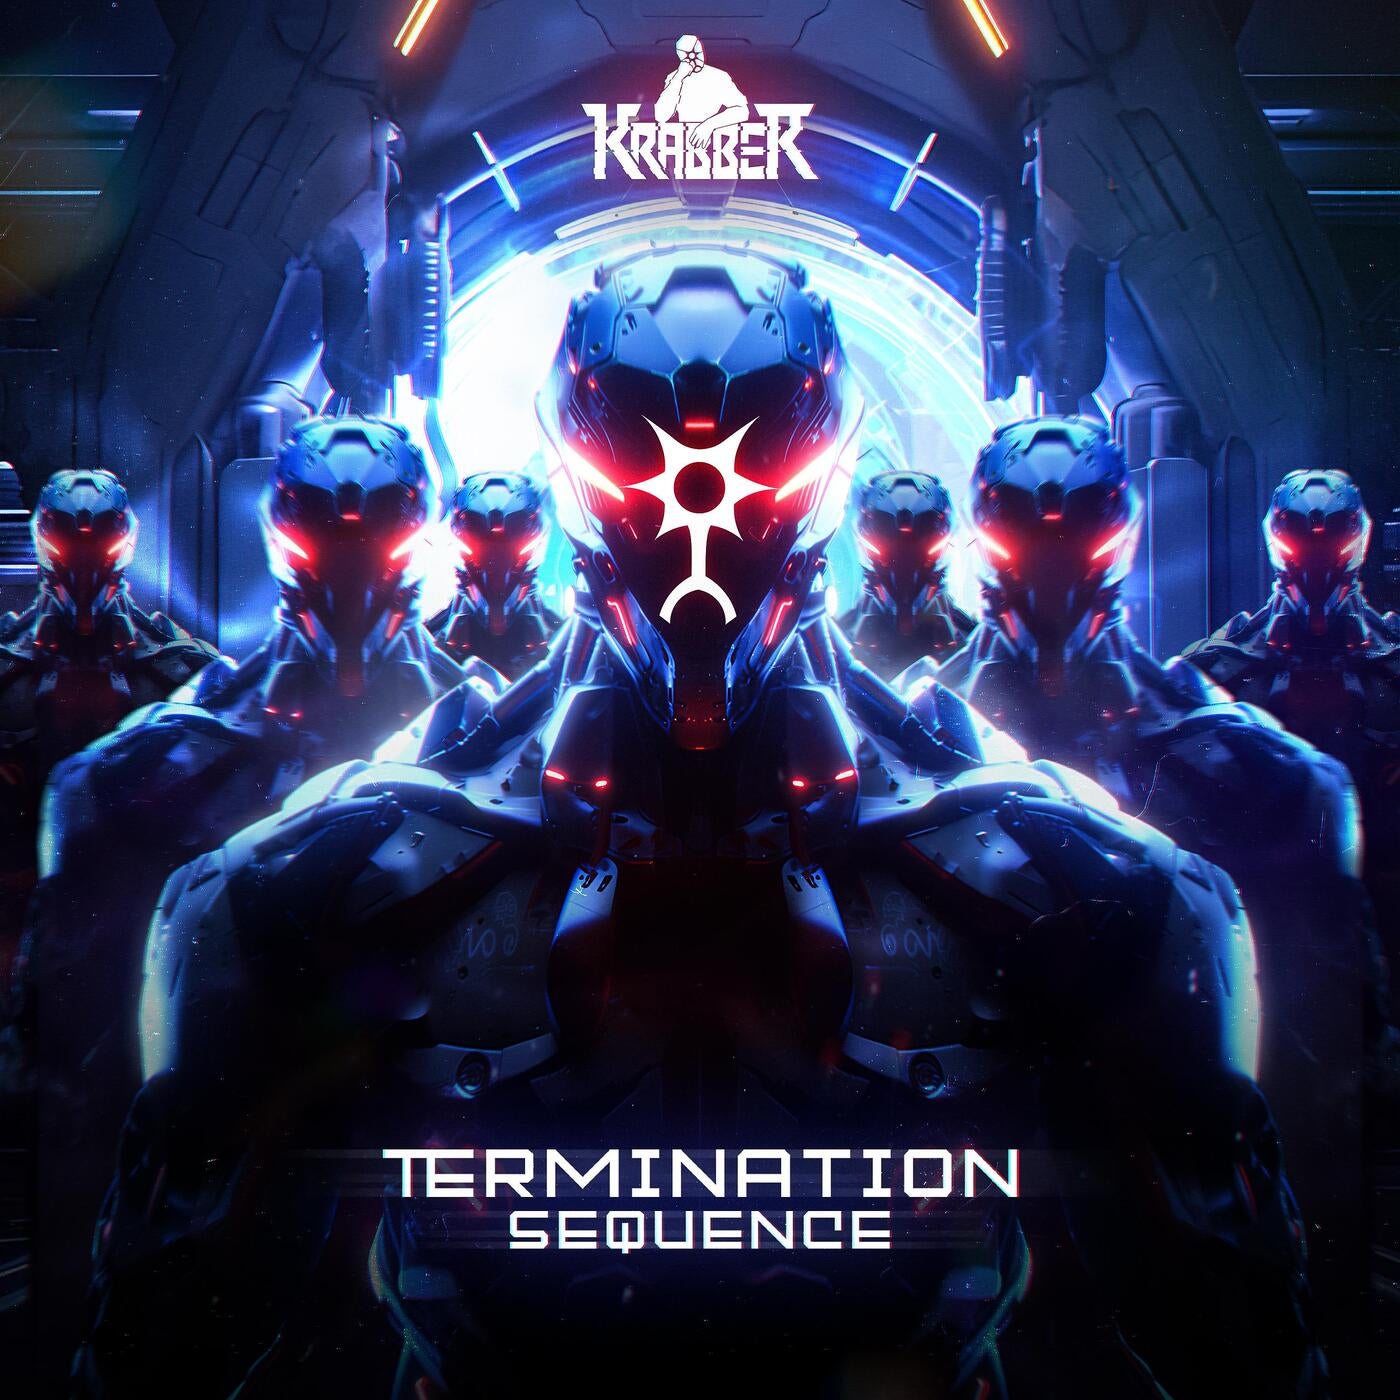 TERMINATION SEQUENCE